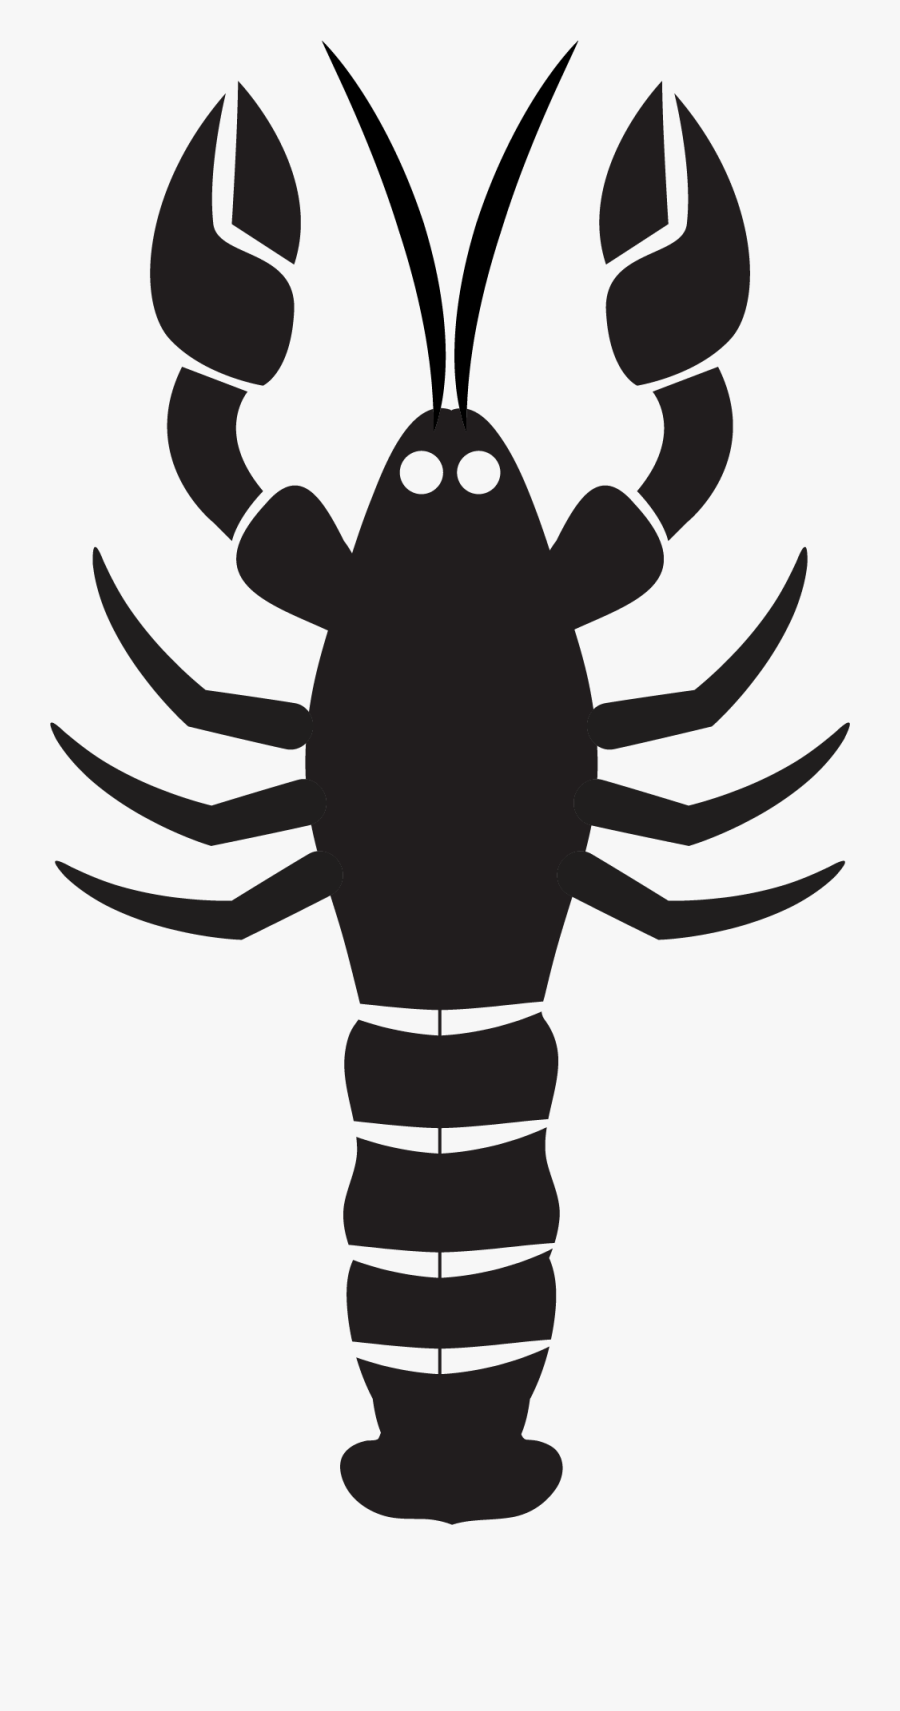 Lobster Mussel Seafood - Lobster Silhouette Png, Transparent Clipart